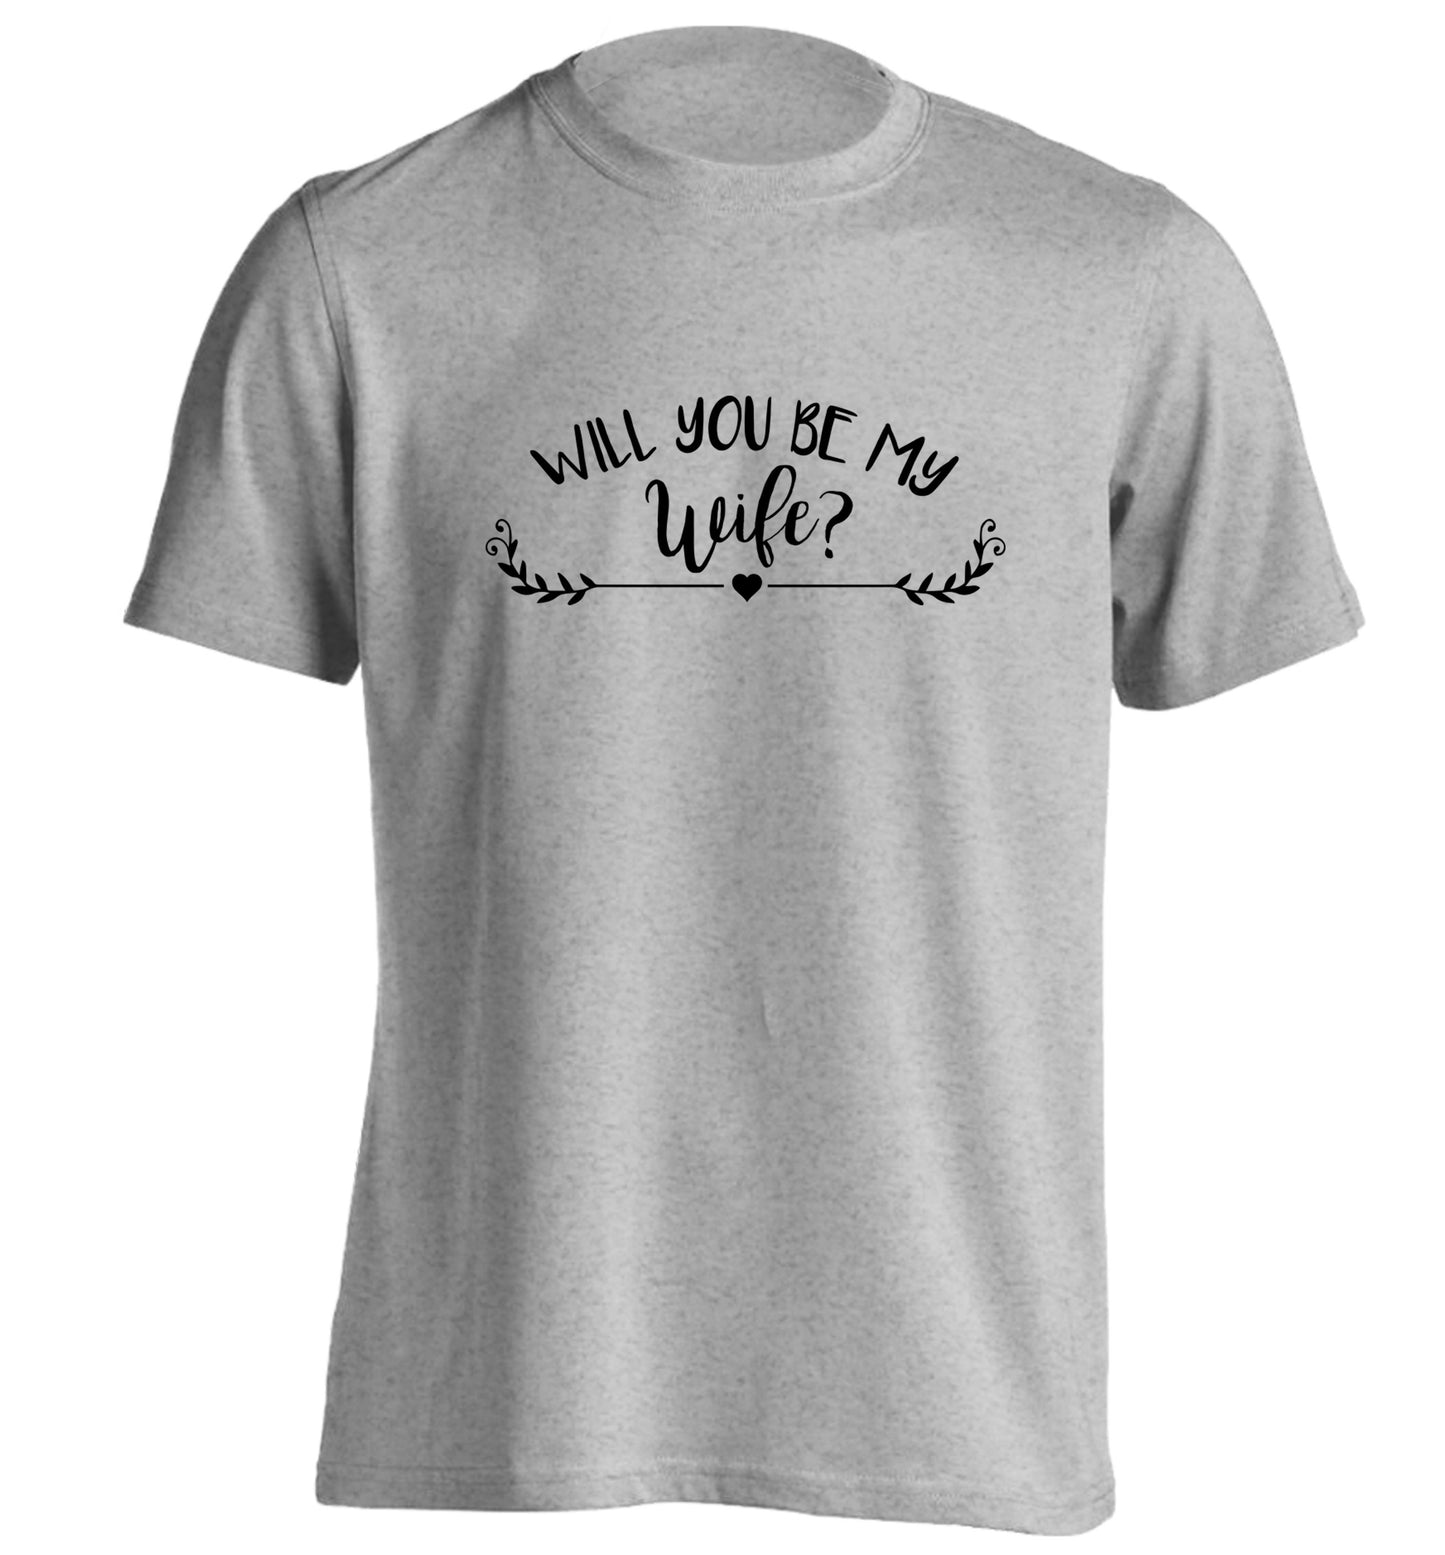 Will you be my wife? adults unisex grey Tshirt 2XL